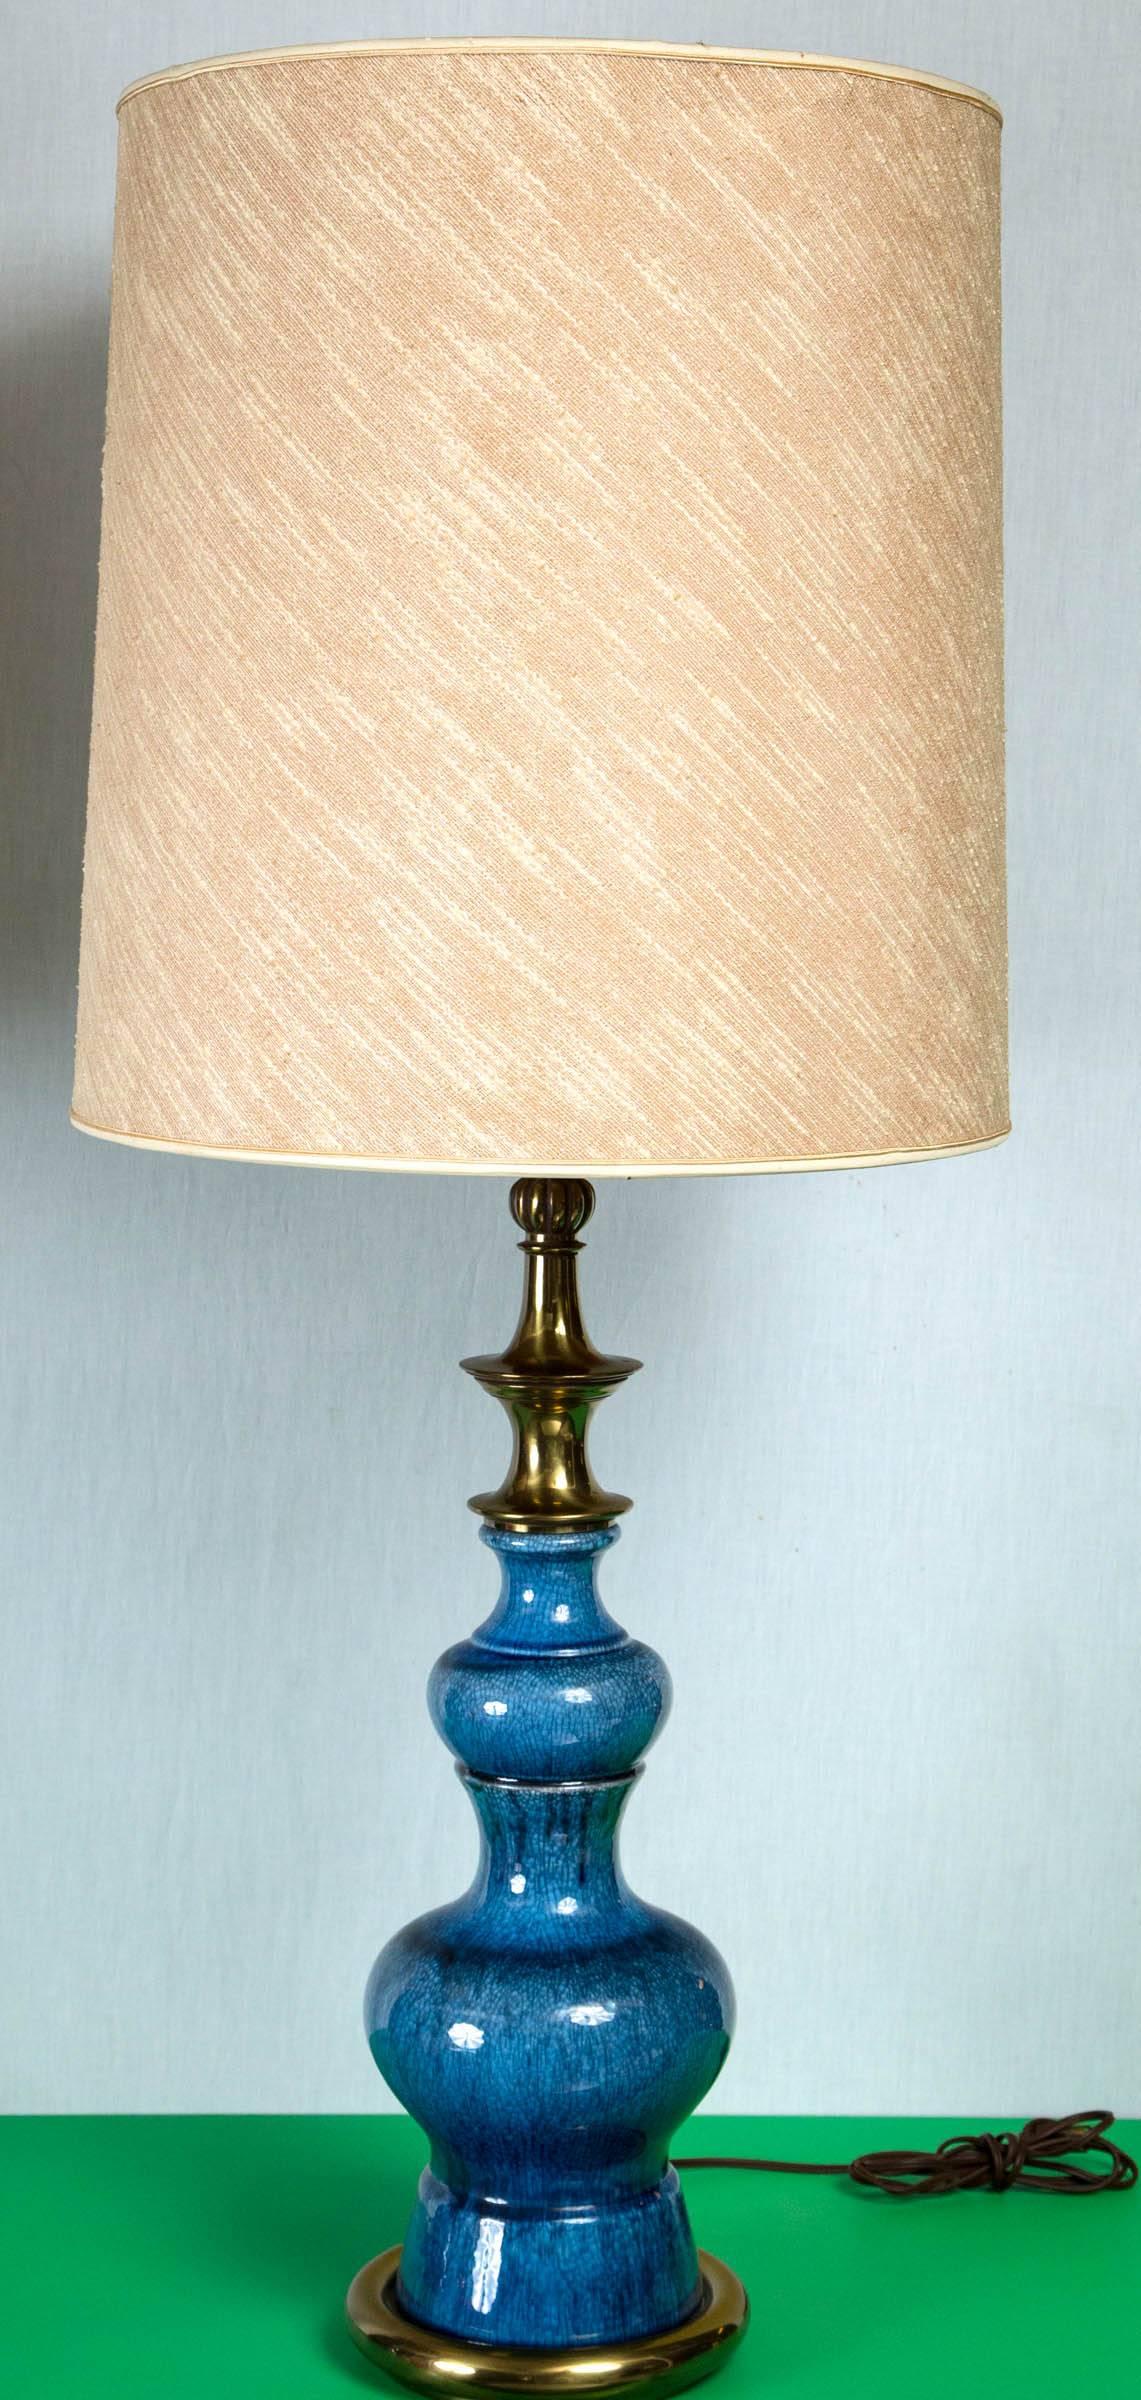 Pair of exquisite blue ceramic Stiffel lamps in a pagoda shape. Original shades included as in photos. Height is to top of finial.